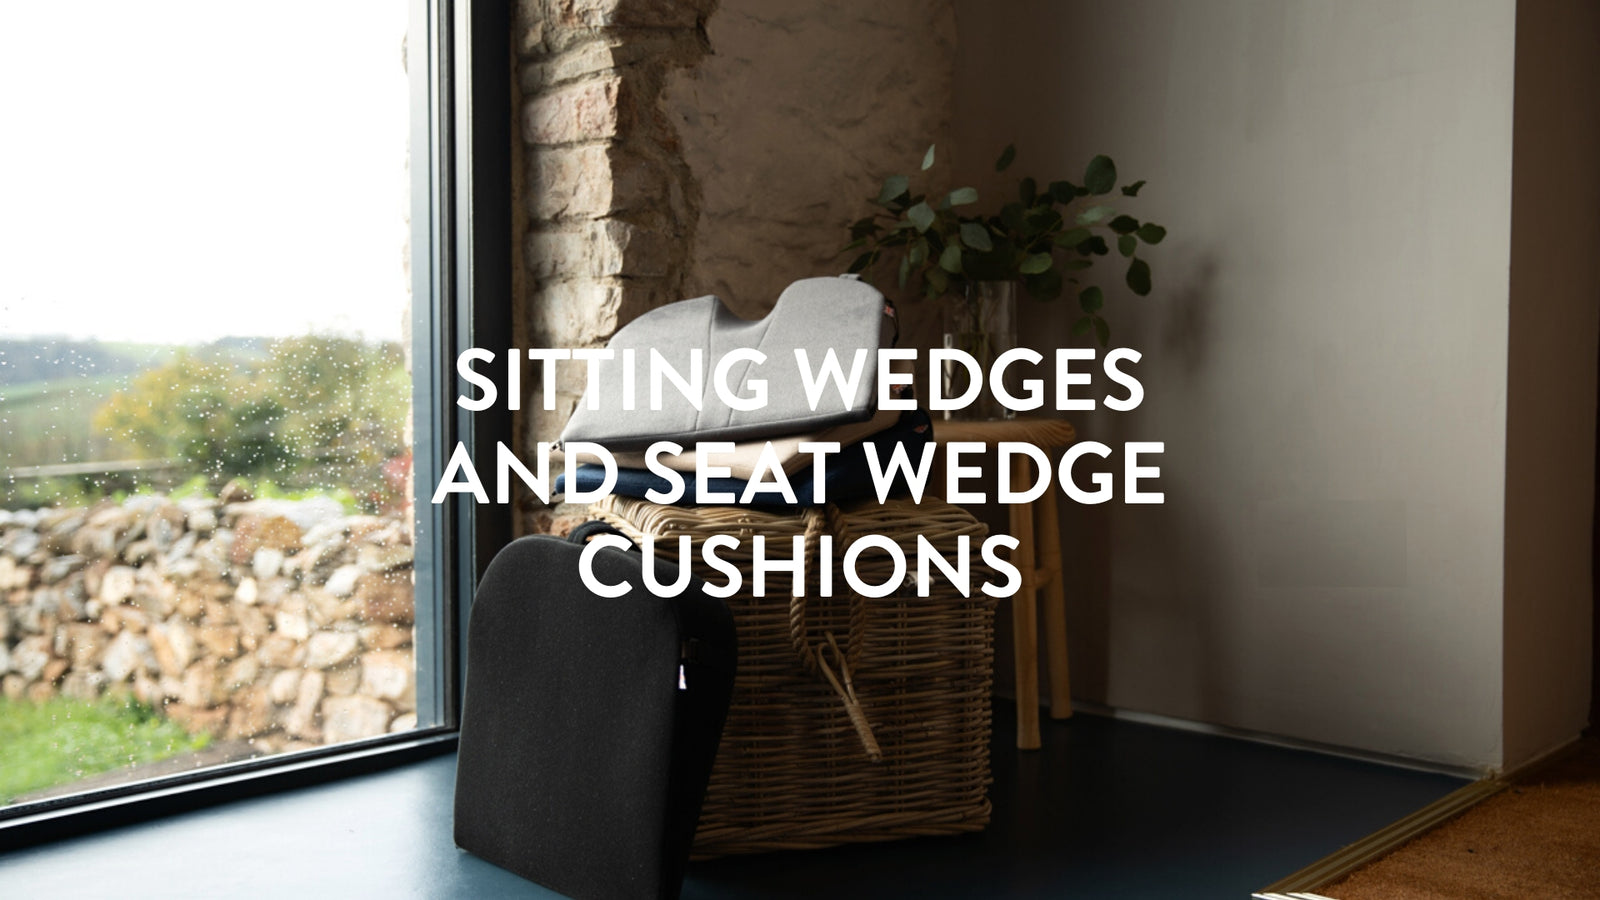 Sitting Wedges and Seat Wedge Cushions  - Your Questions Answered